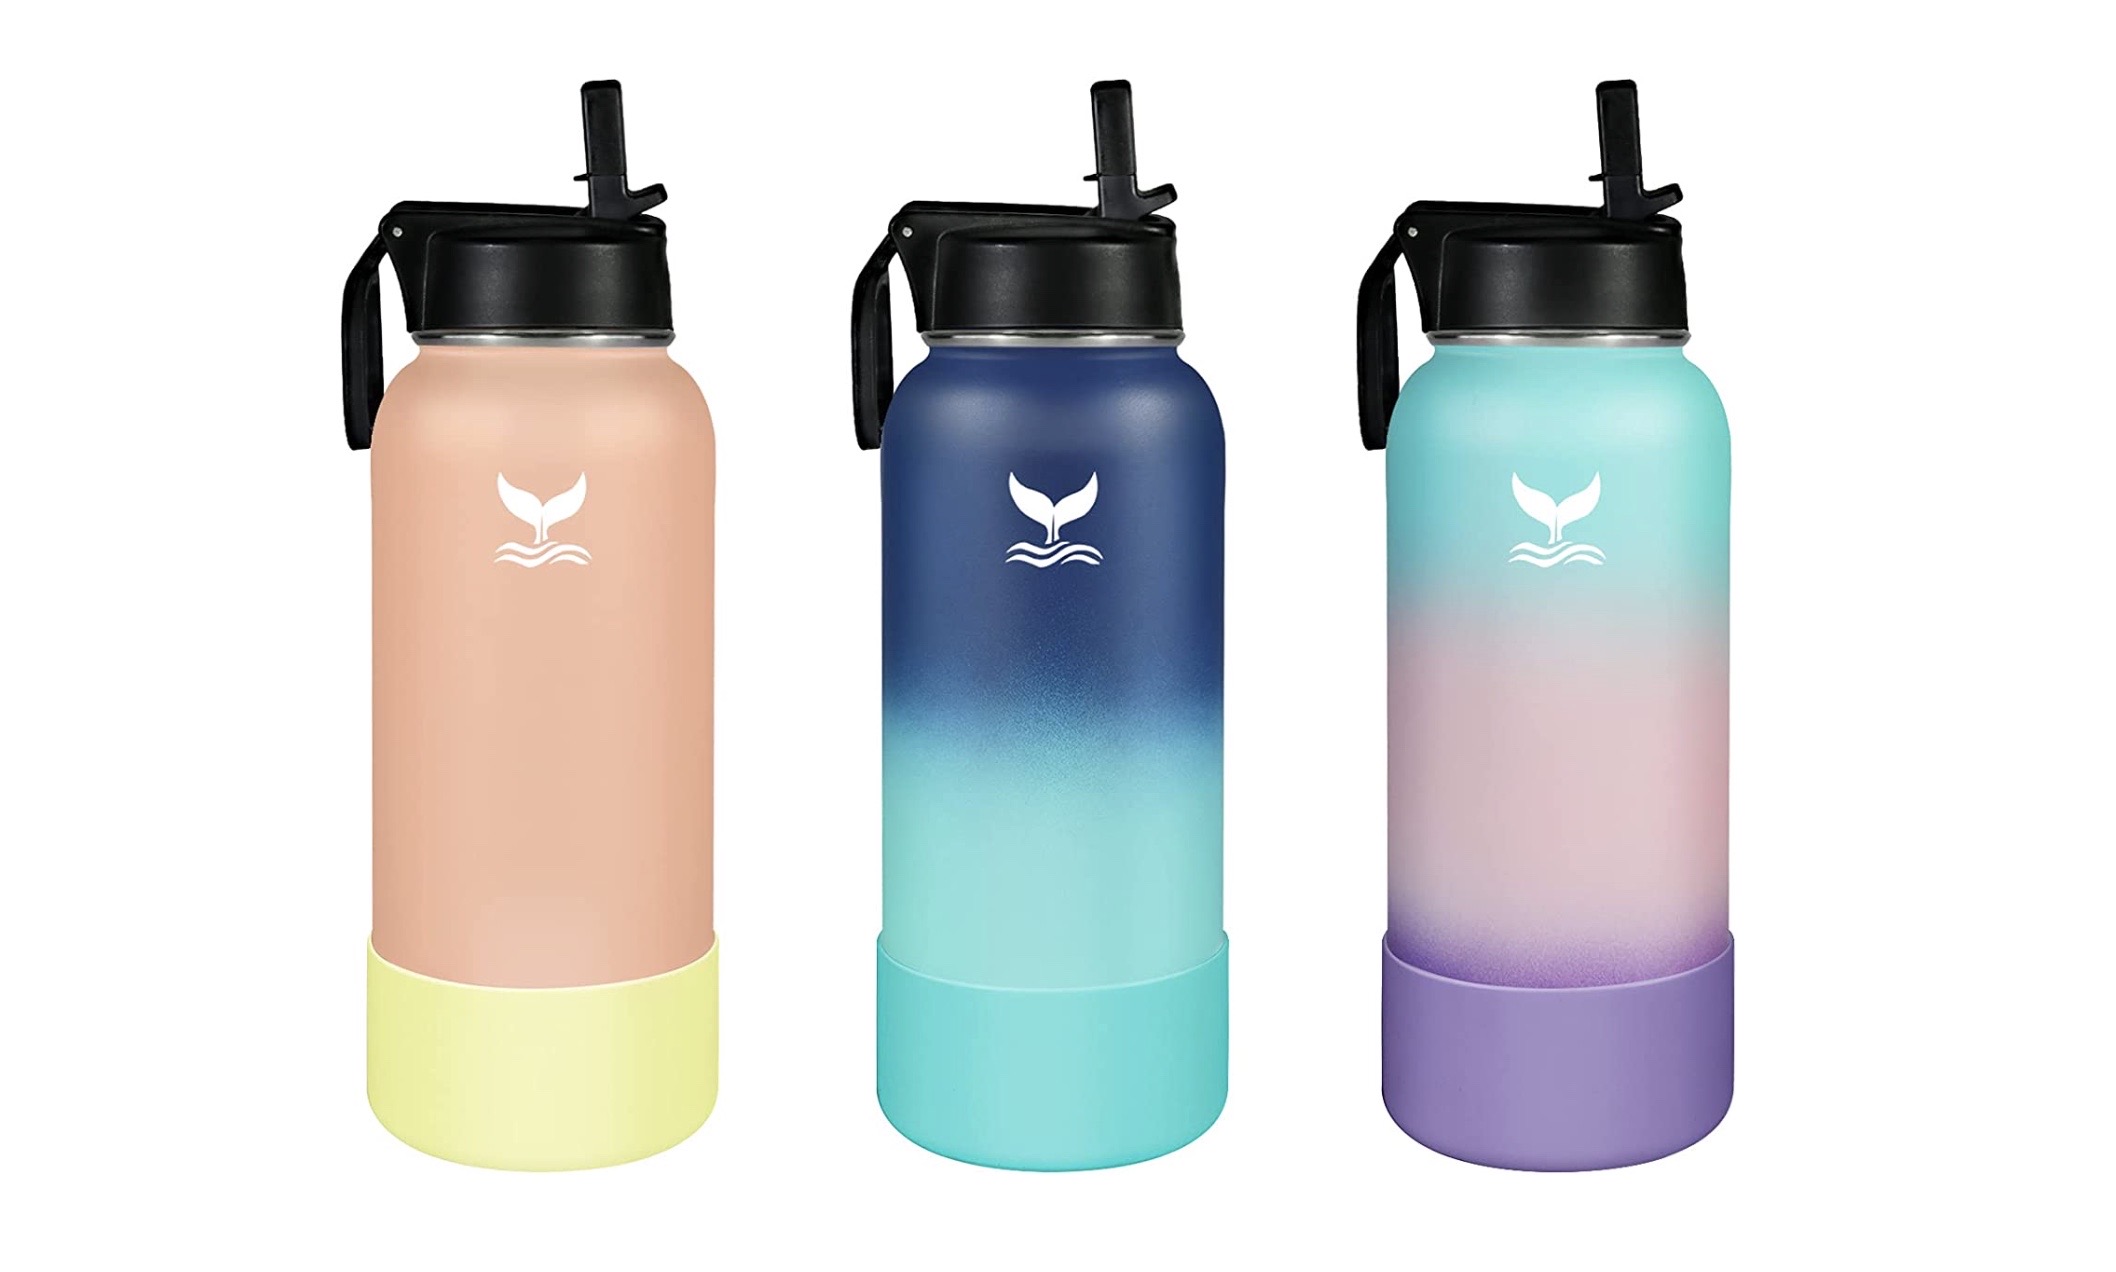 Affute Diamond Silicone Boot for Hydroflask Water Bottle and Other